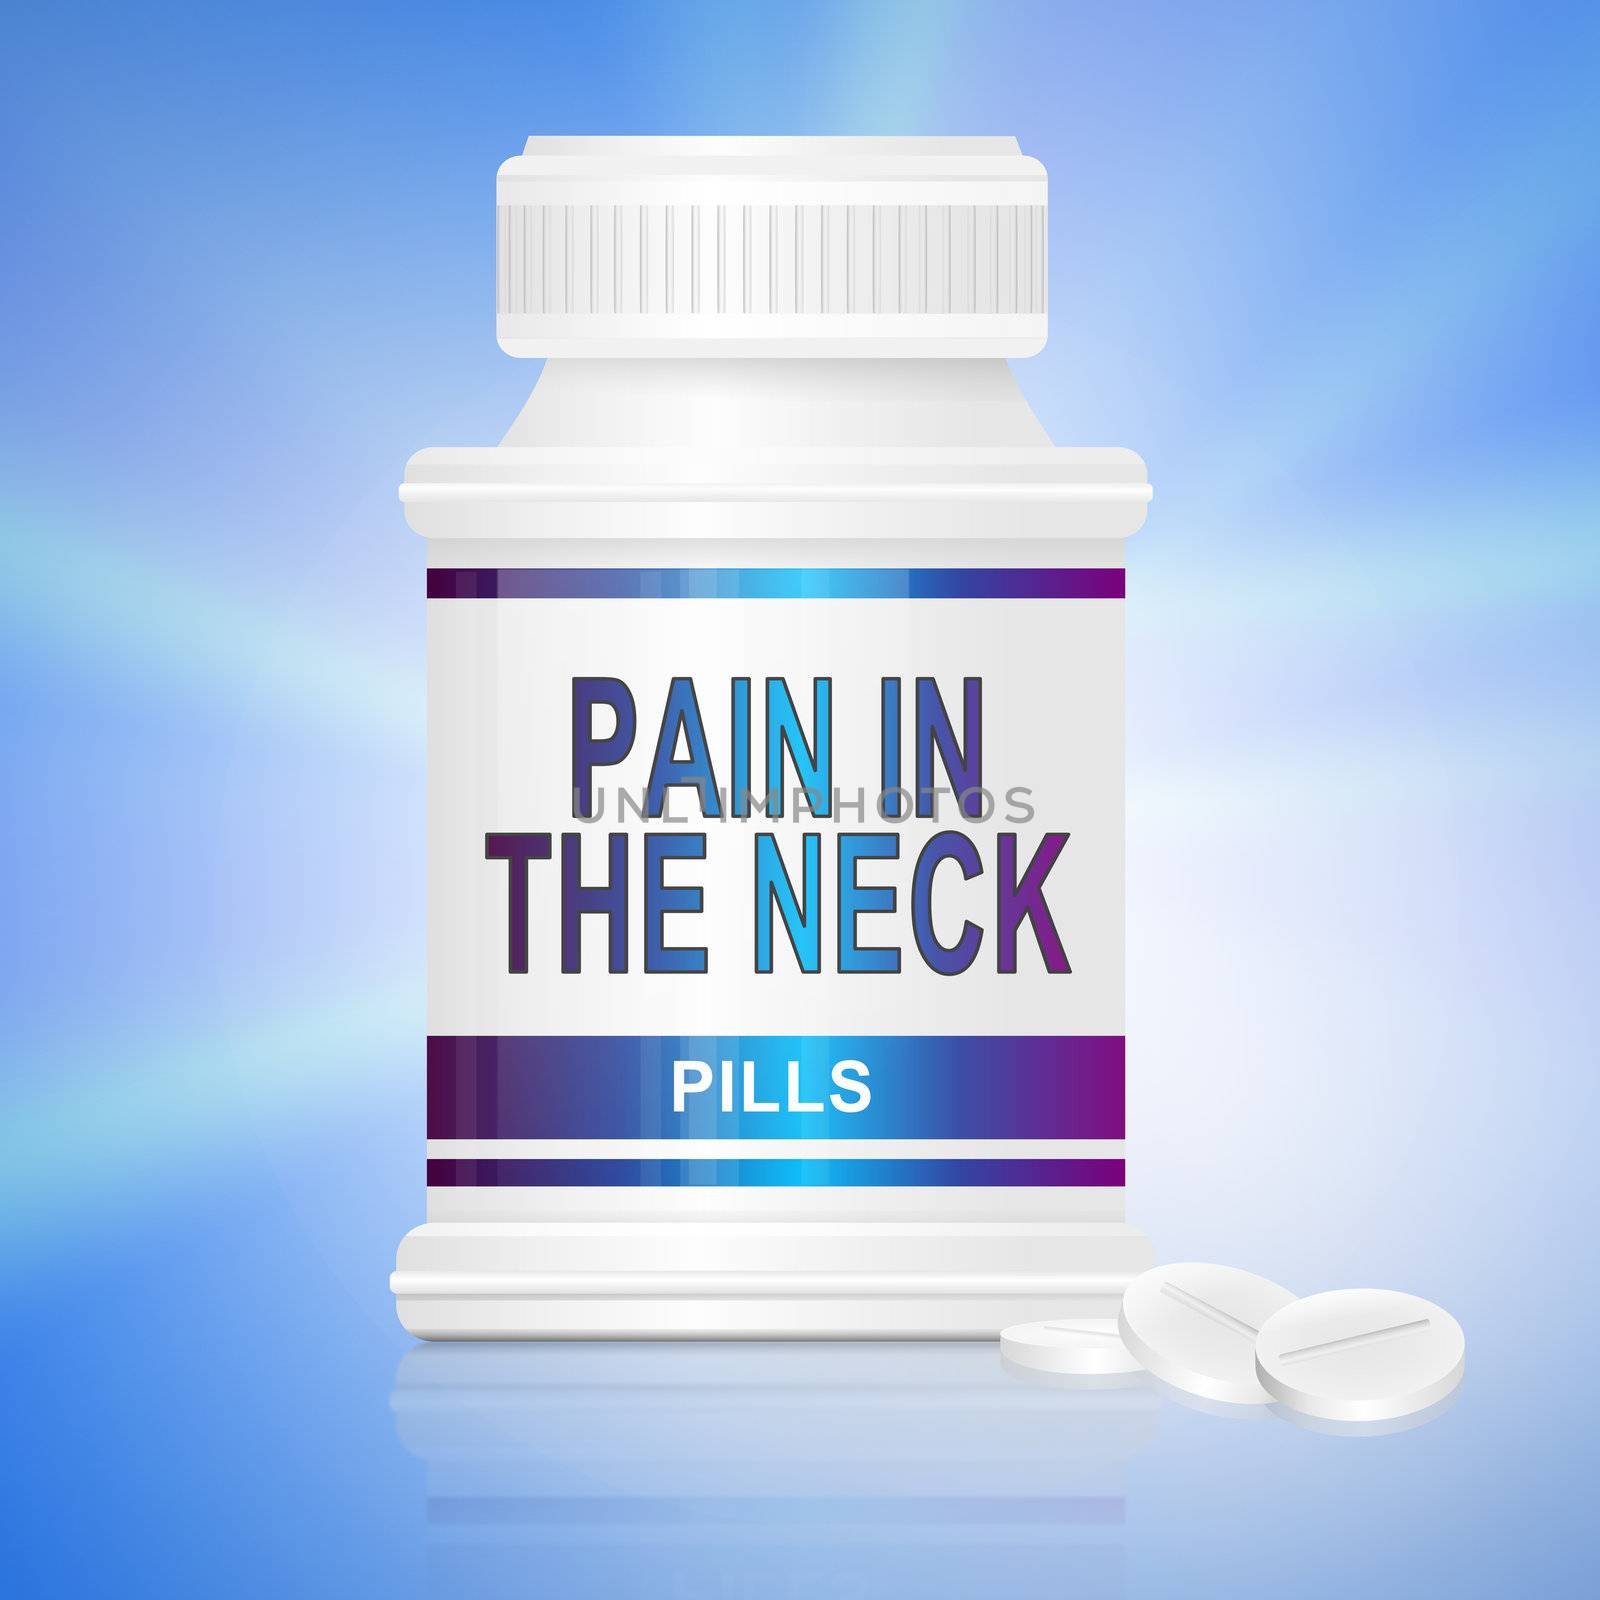 Illustration depicting a single medication container with the words 'pain in the neck pills' on the front with blue background.